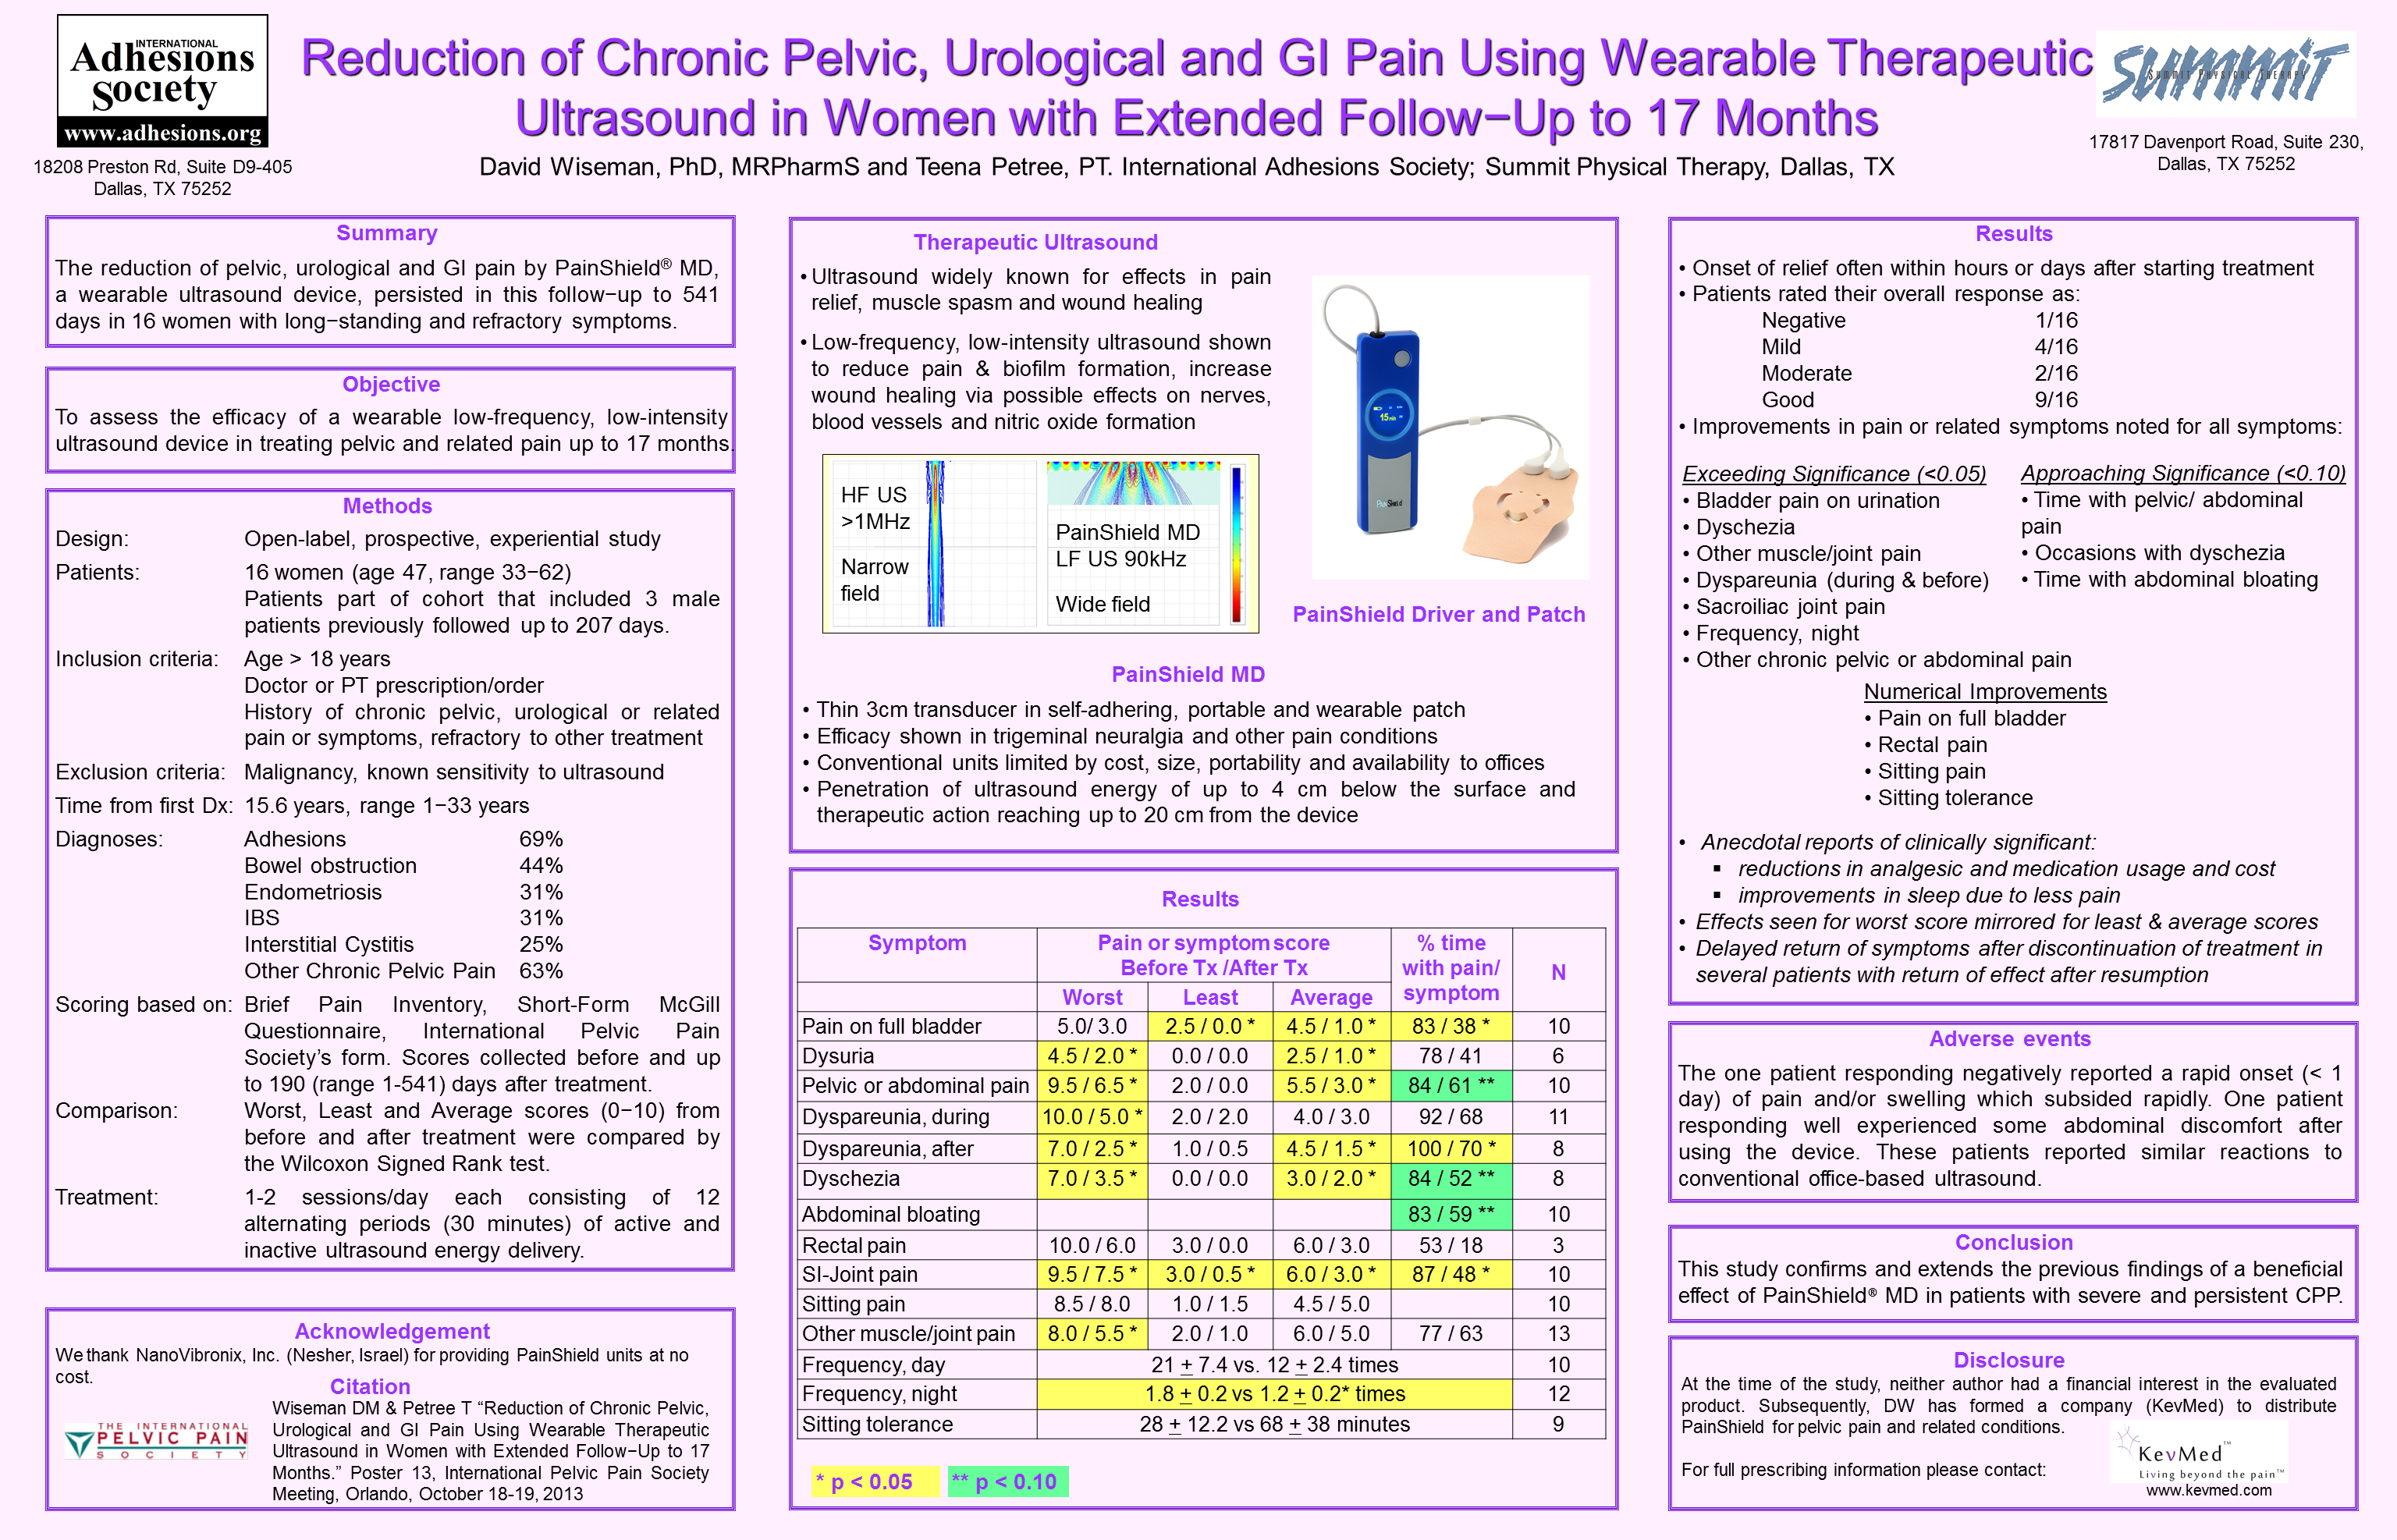 PainShield MD Clinical Data Follow-Up Study Oct 2013